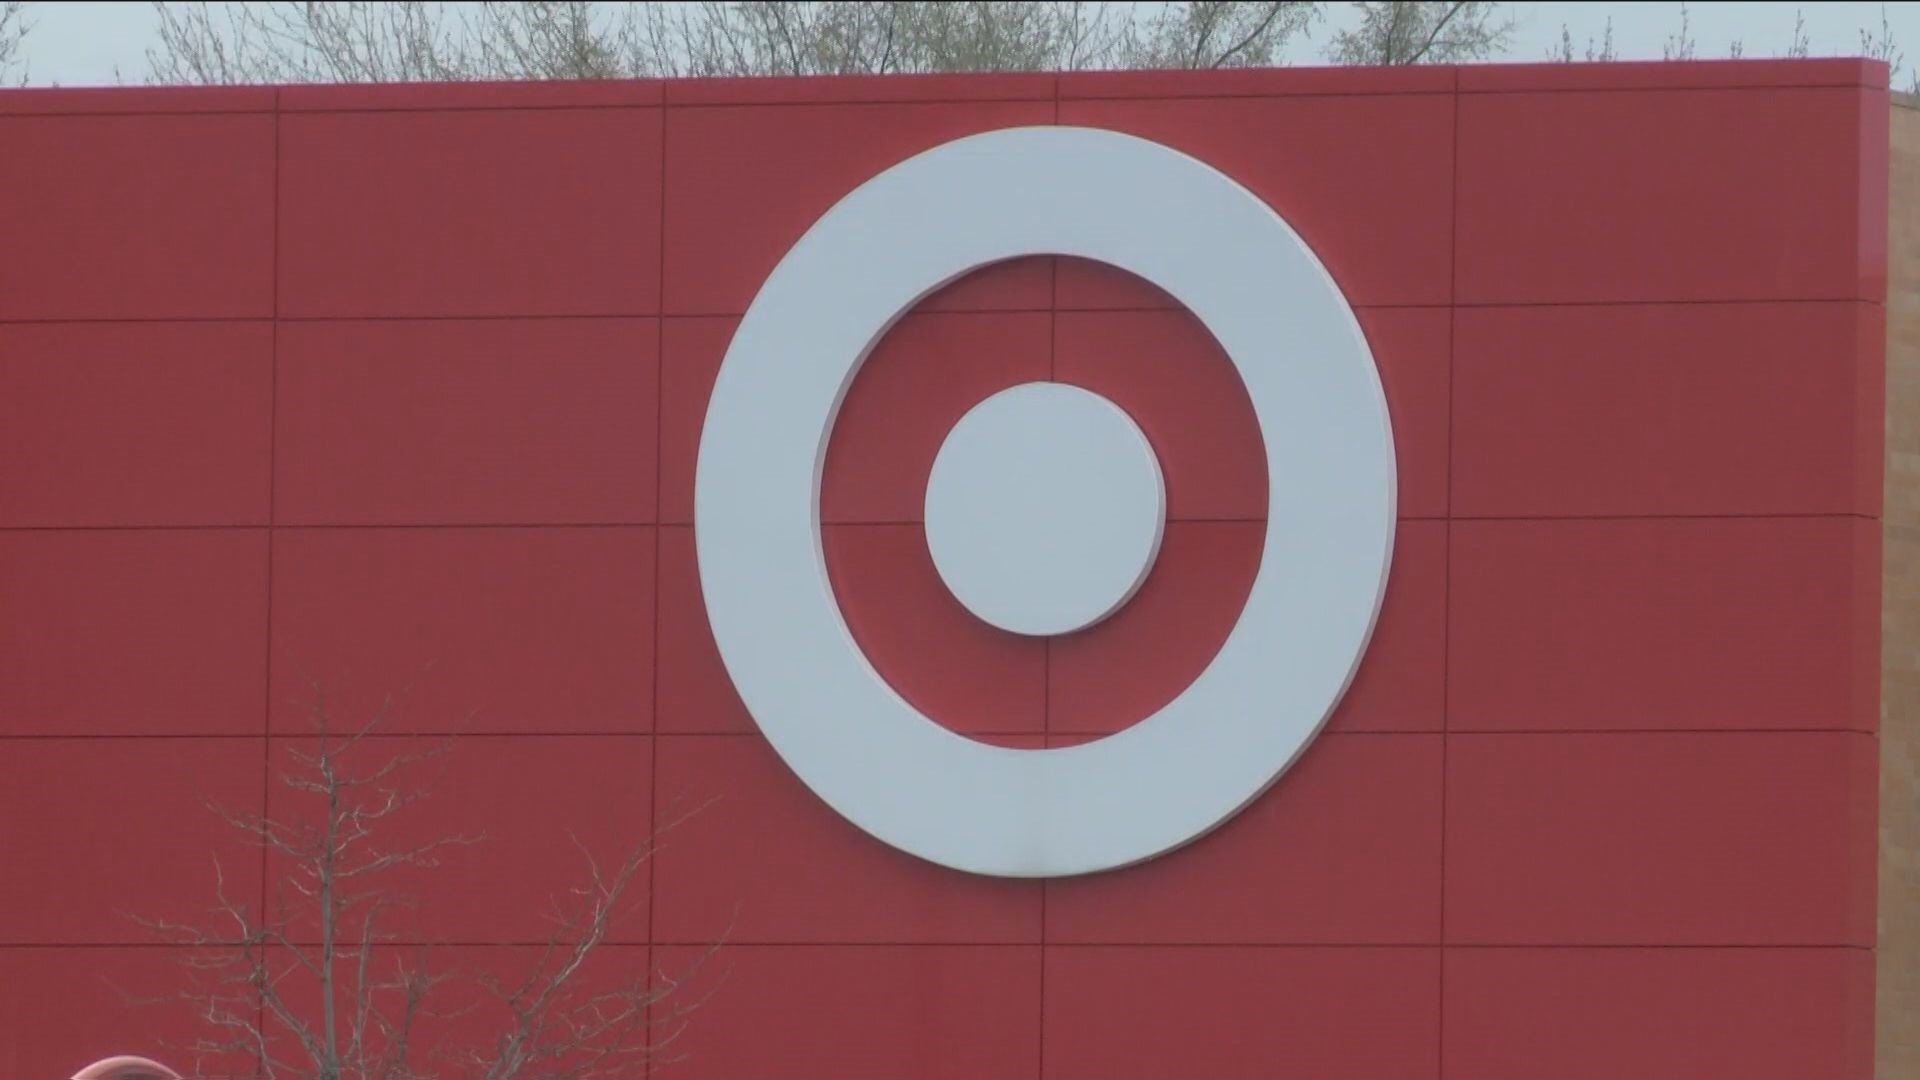 Educators who sign up for Target Circle will get a one-time coupon for 15% off school supplies.